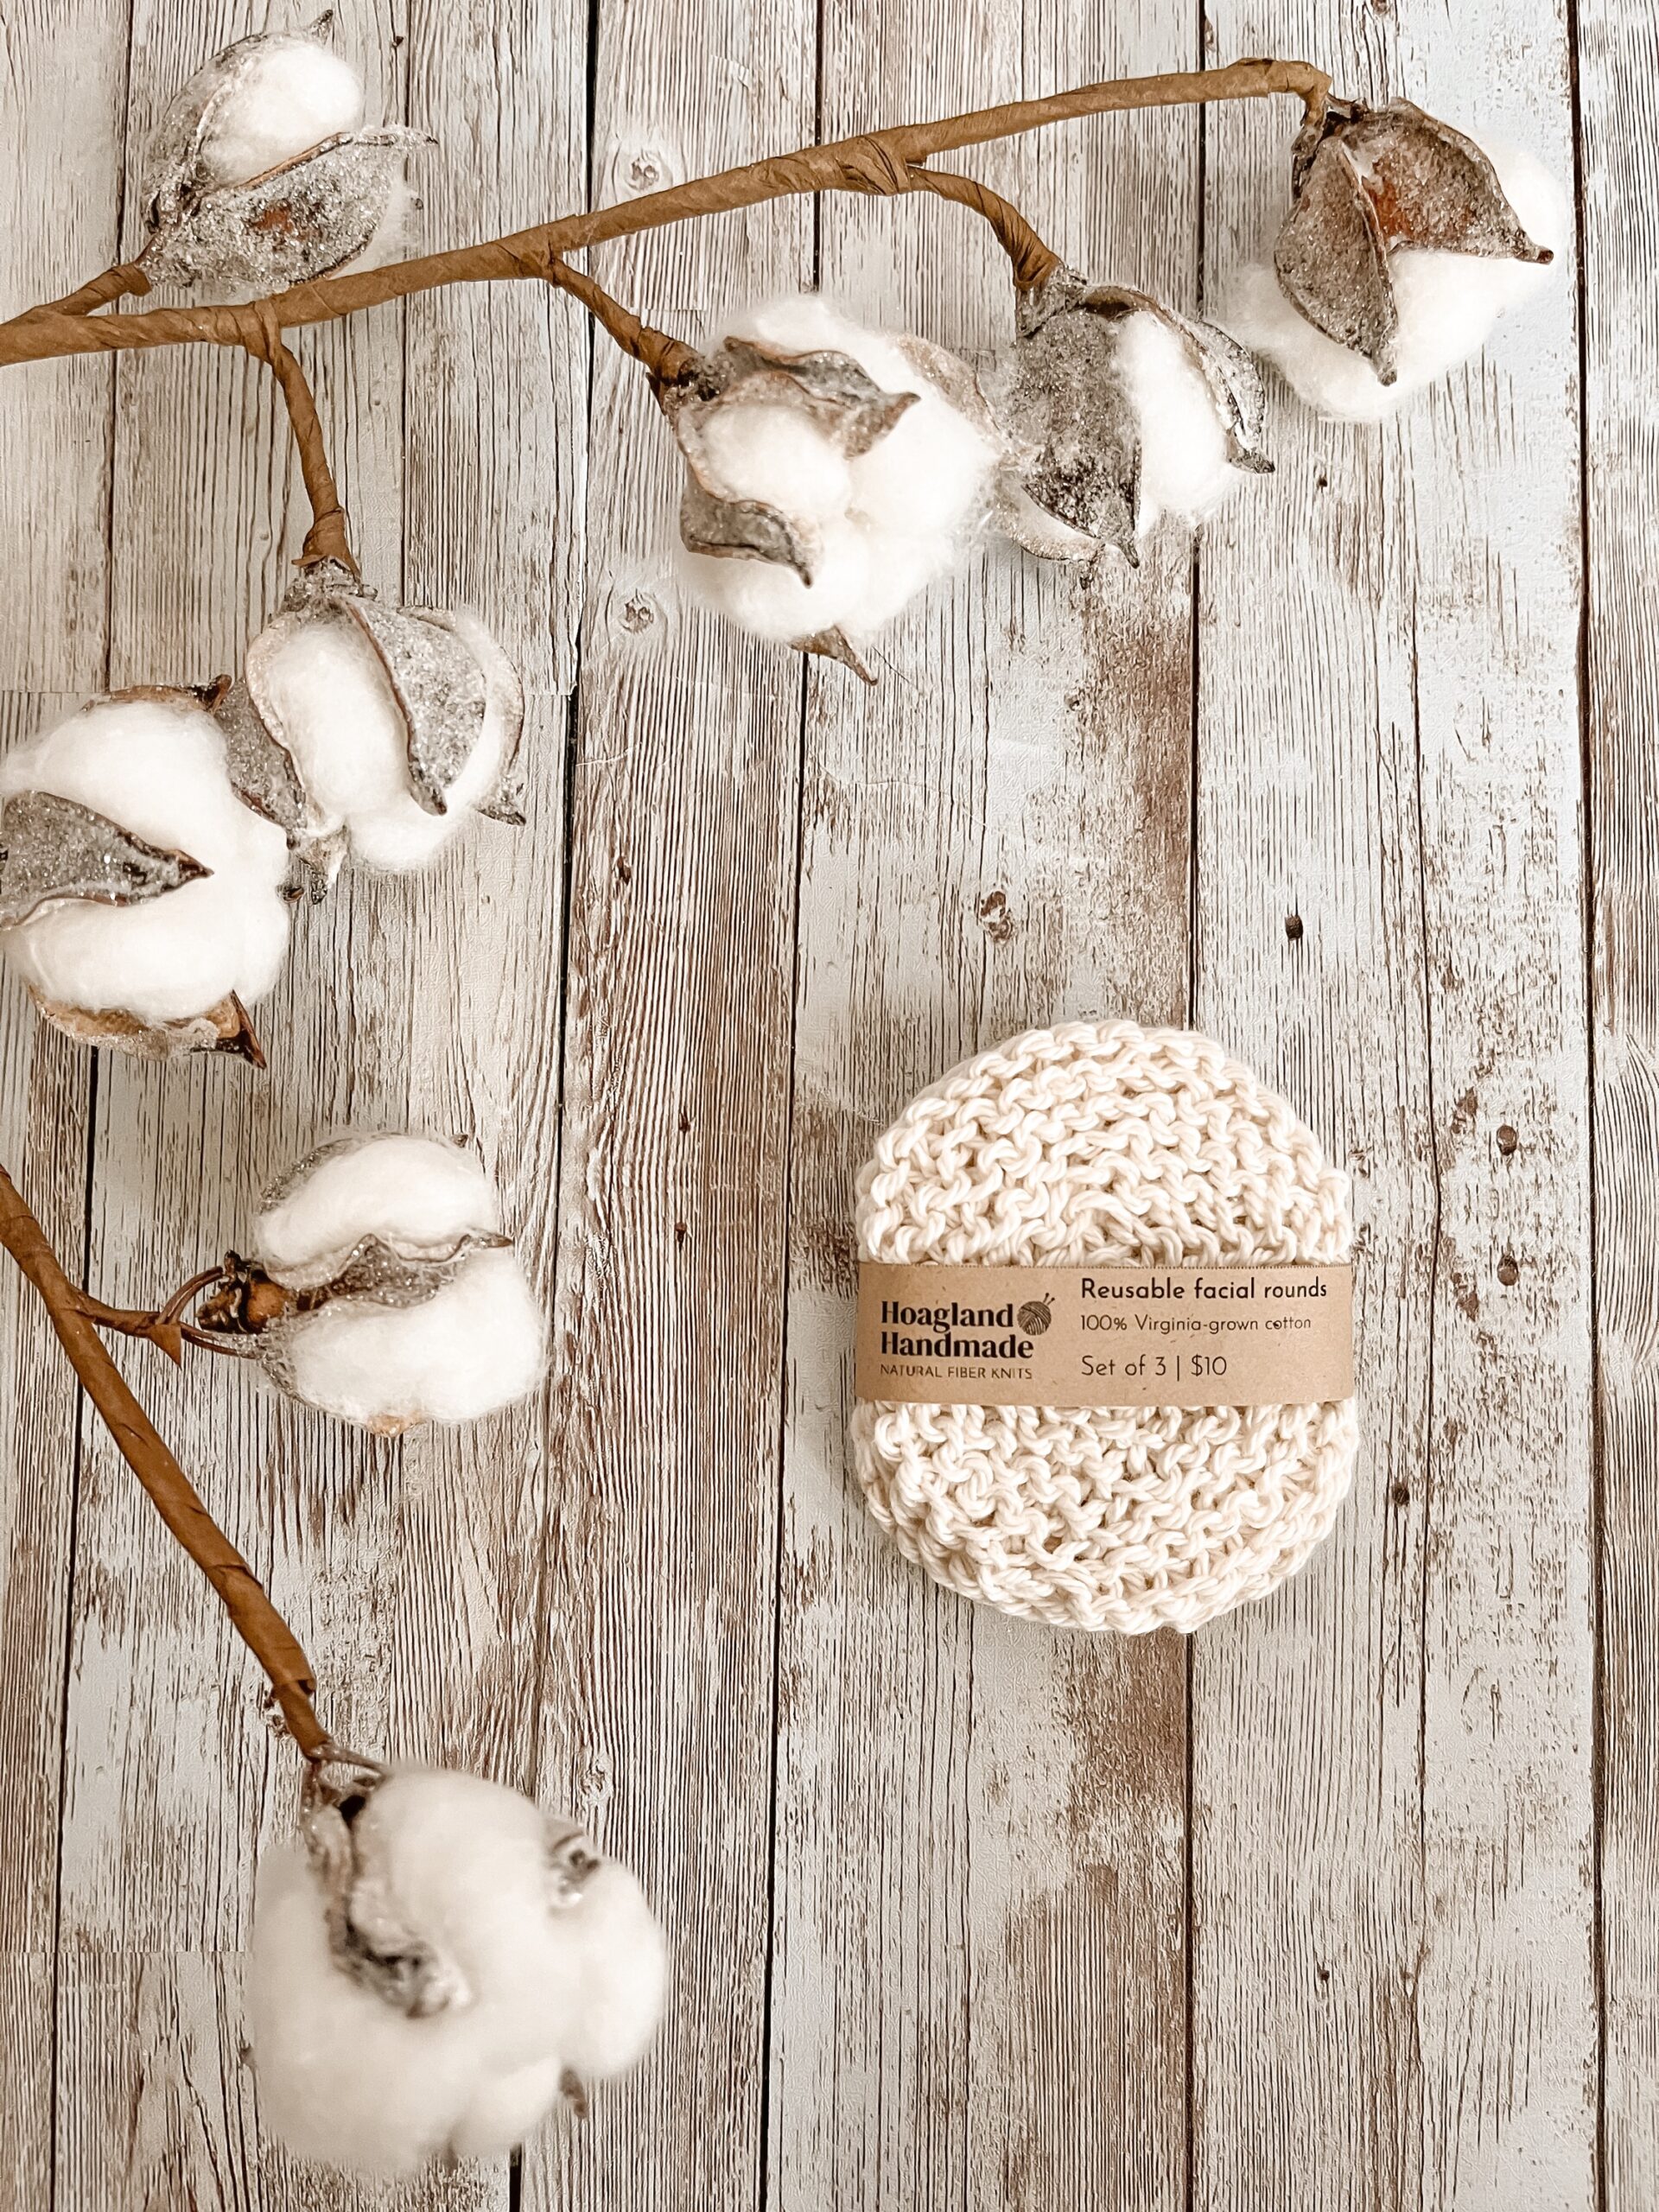 A set of Virginia-grown cotton reusable facial rounds rests on a wood floor, with a cotton stem surrounding the set on the top and left